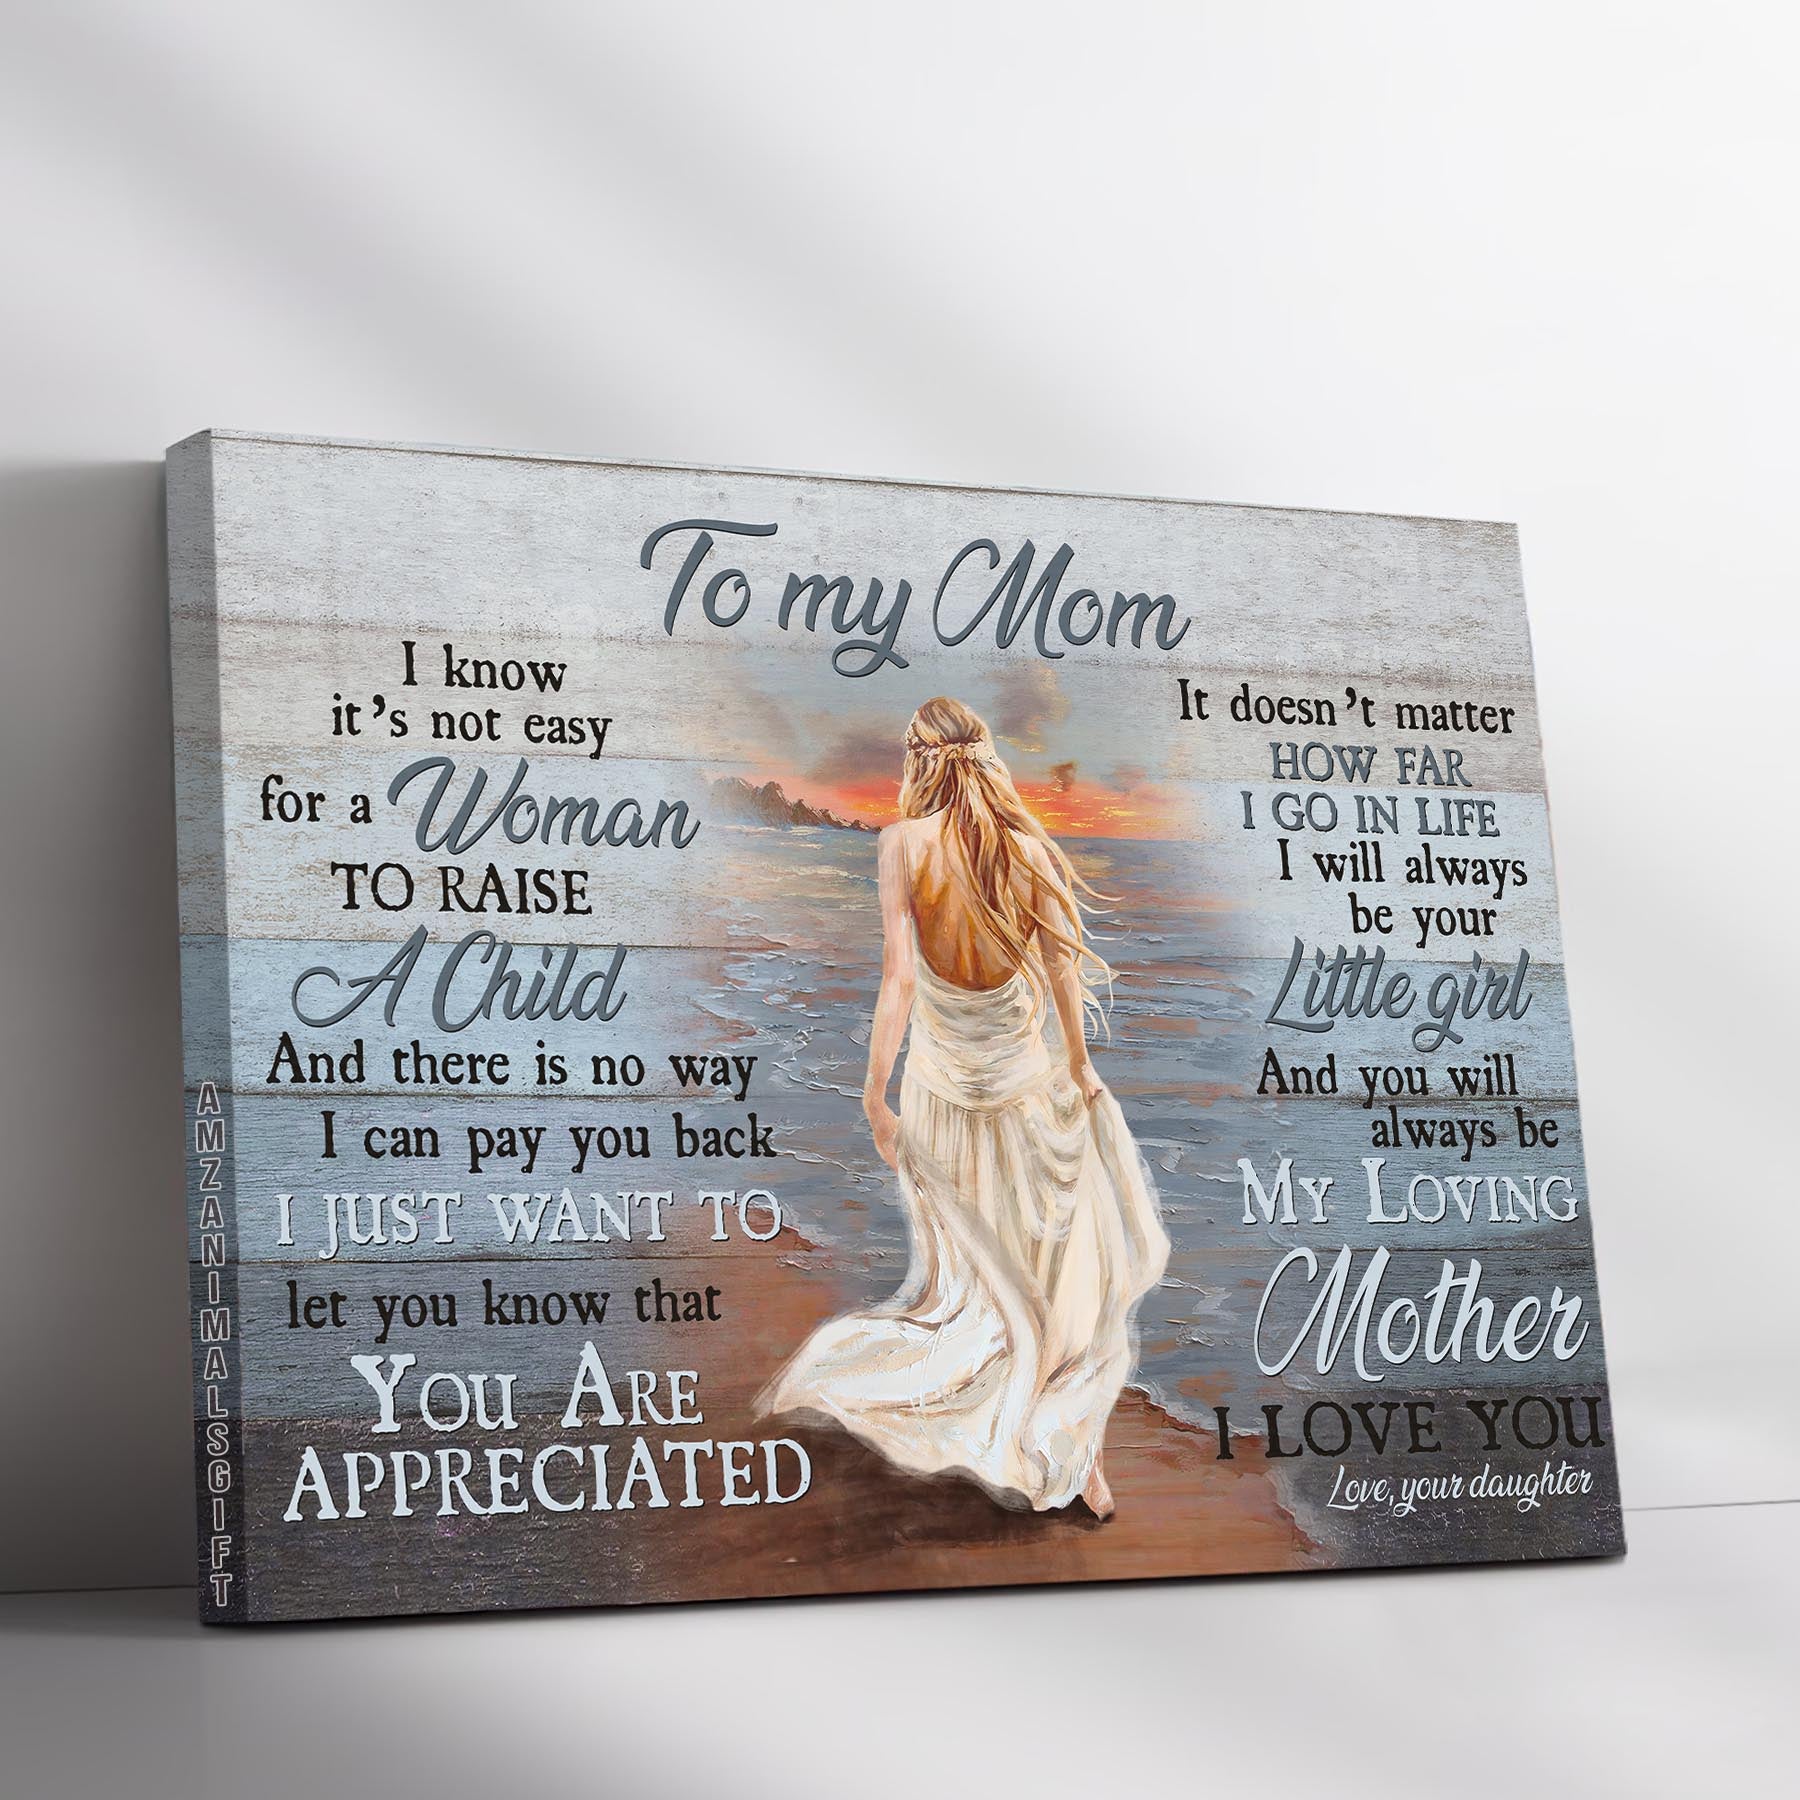 Family Premium Wrapped Landscape Canvas - Daughter To Mom, Beautiful Lady, Walking On The Beach, My Loving Mother, I Love You - Gift For Mother, Mom